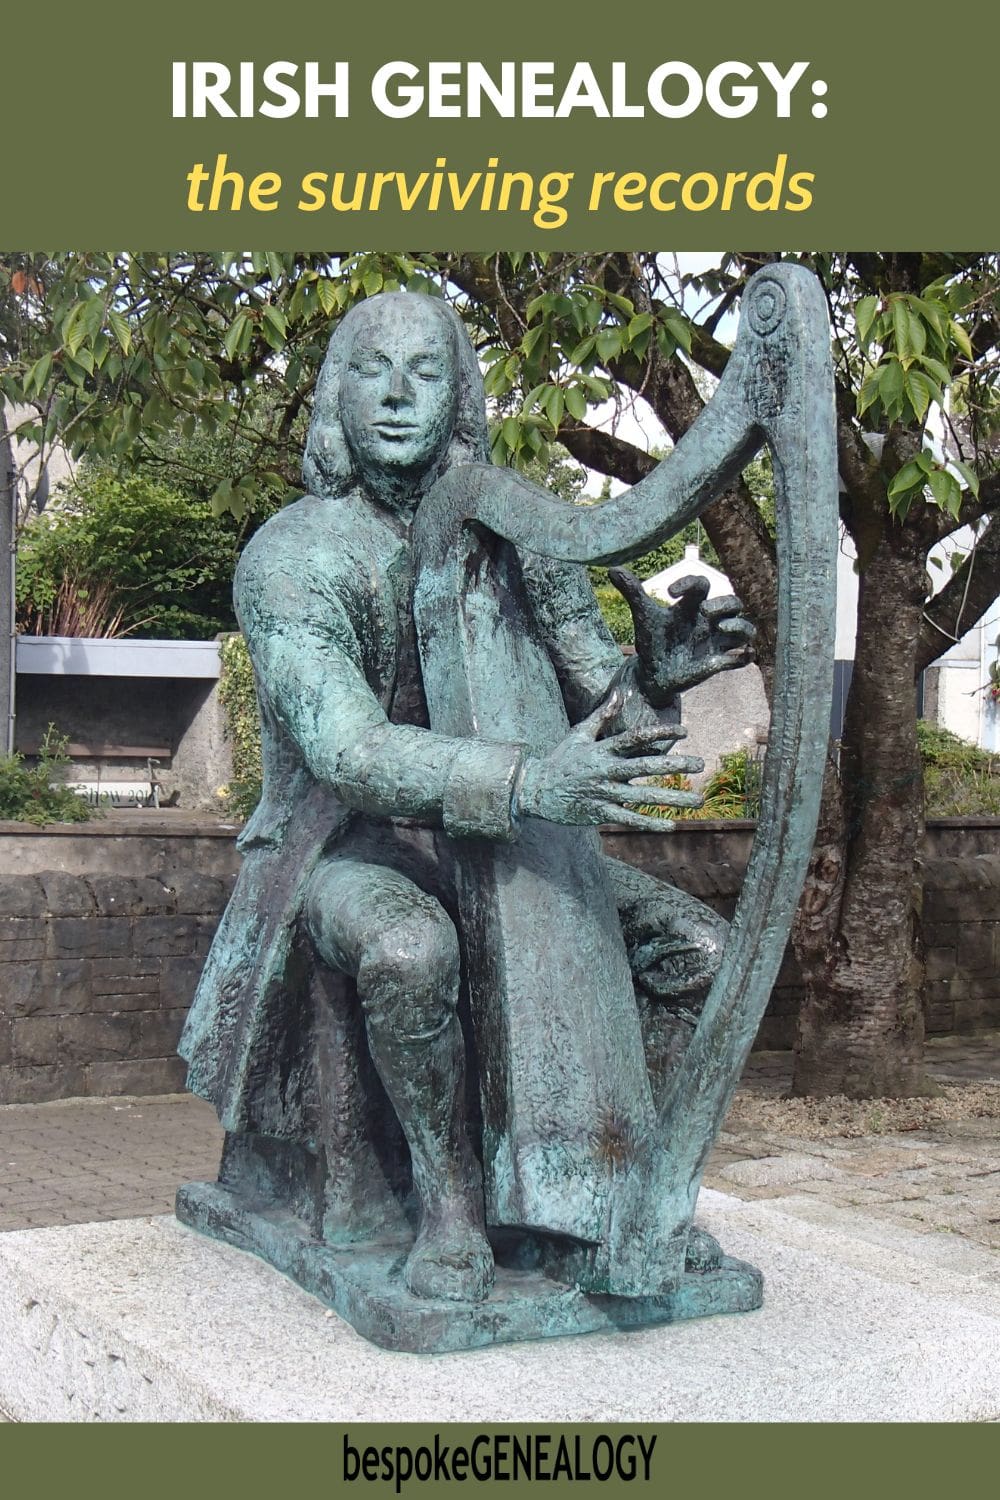 Pinterest pin. Irish genealogy. The surviving records. Photo of a bronze statue depicting a blind woman playing a harp.